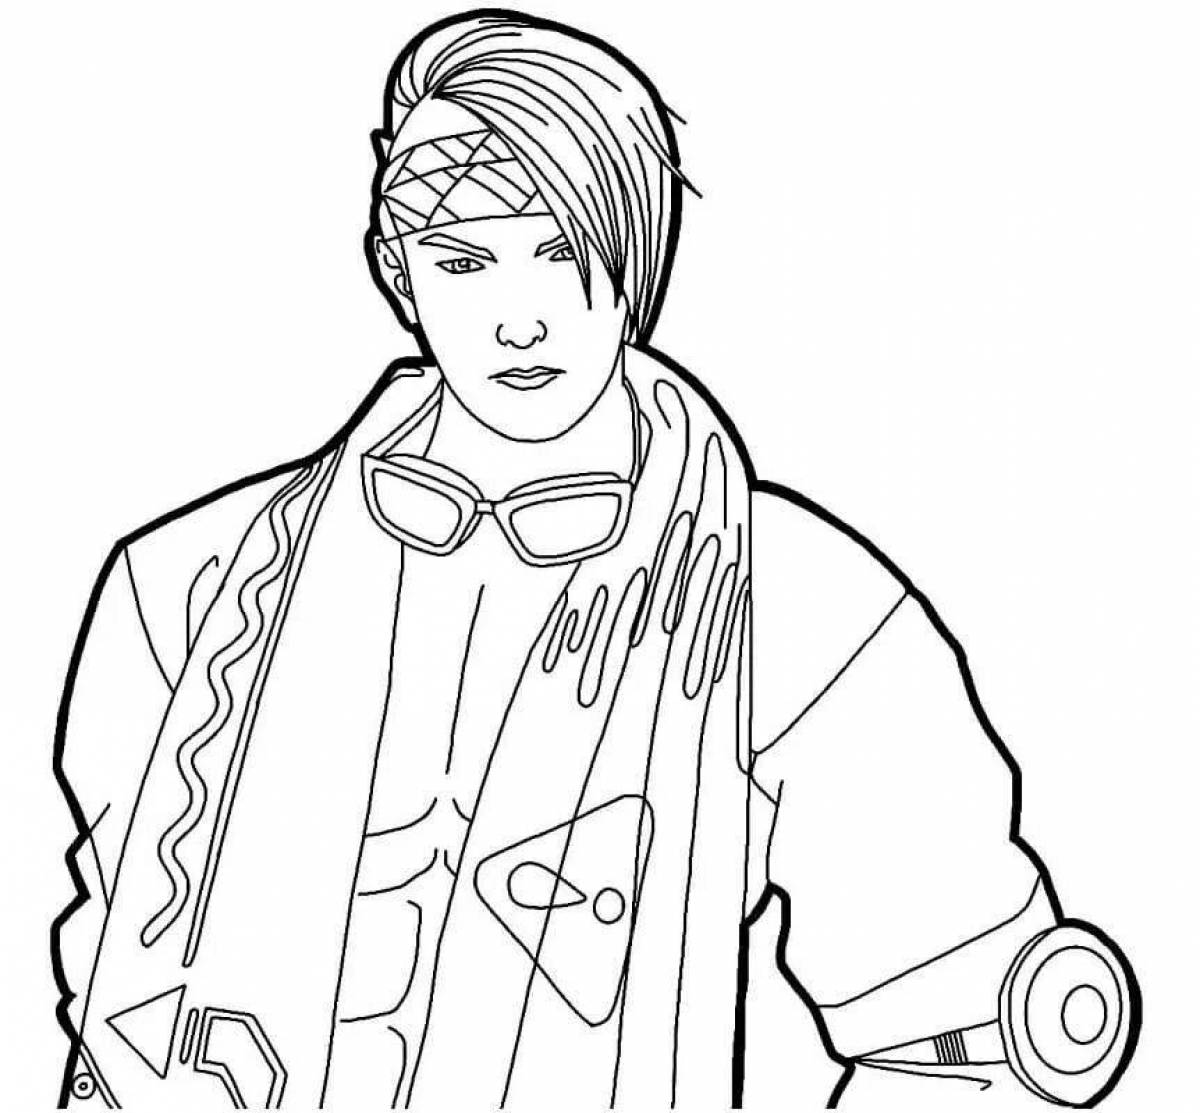 Colorful ff coloring page